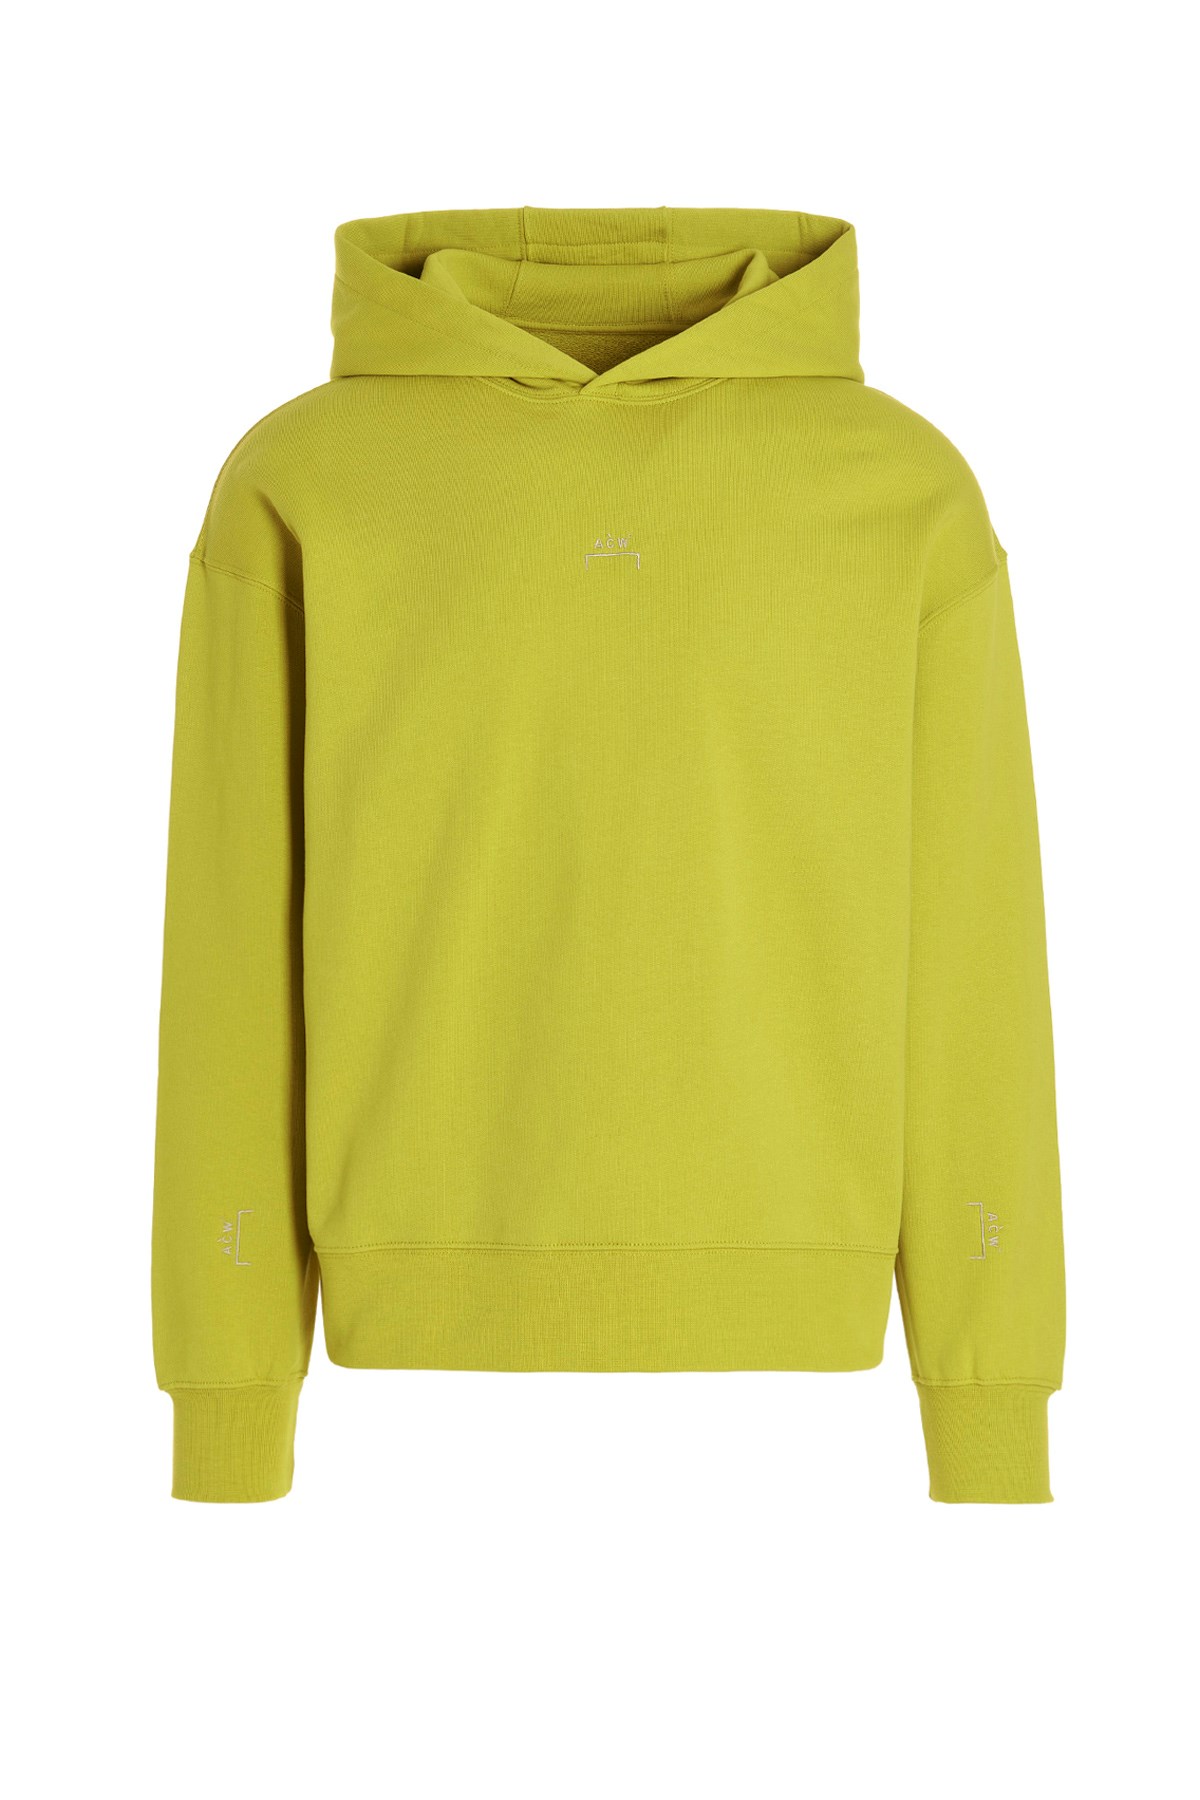 A-COLD-WALL* Kapuzenpullover 'Essential'